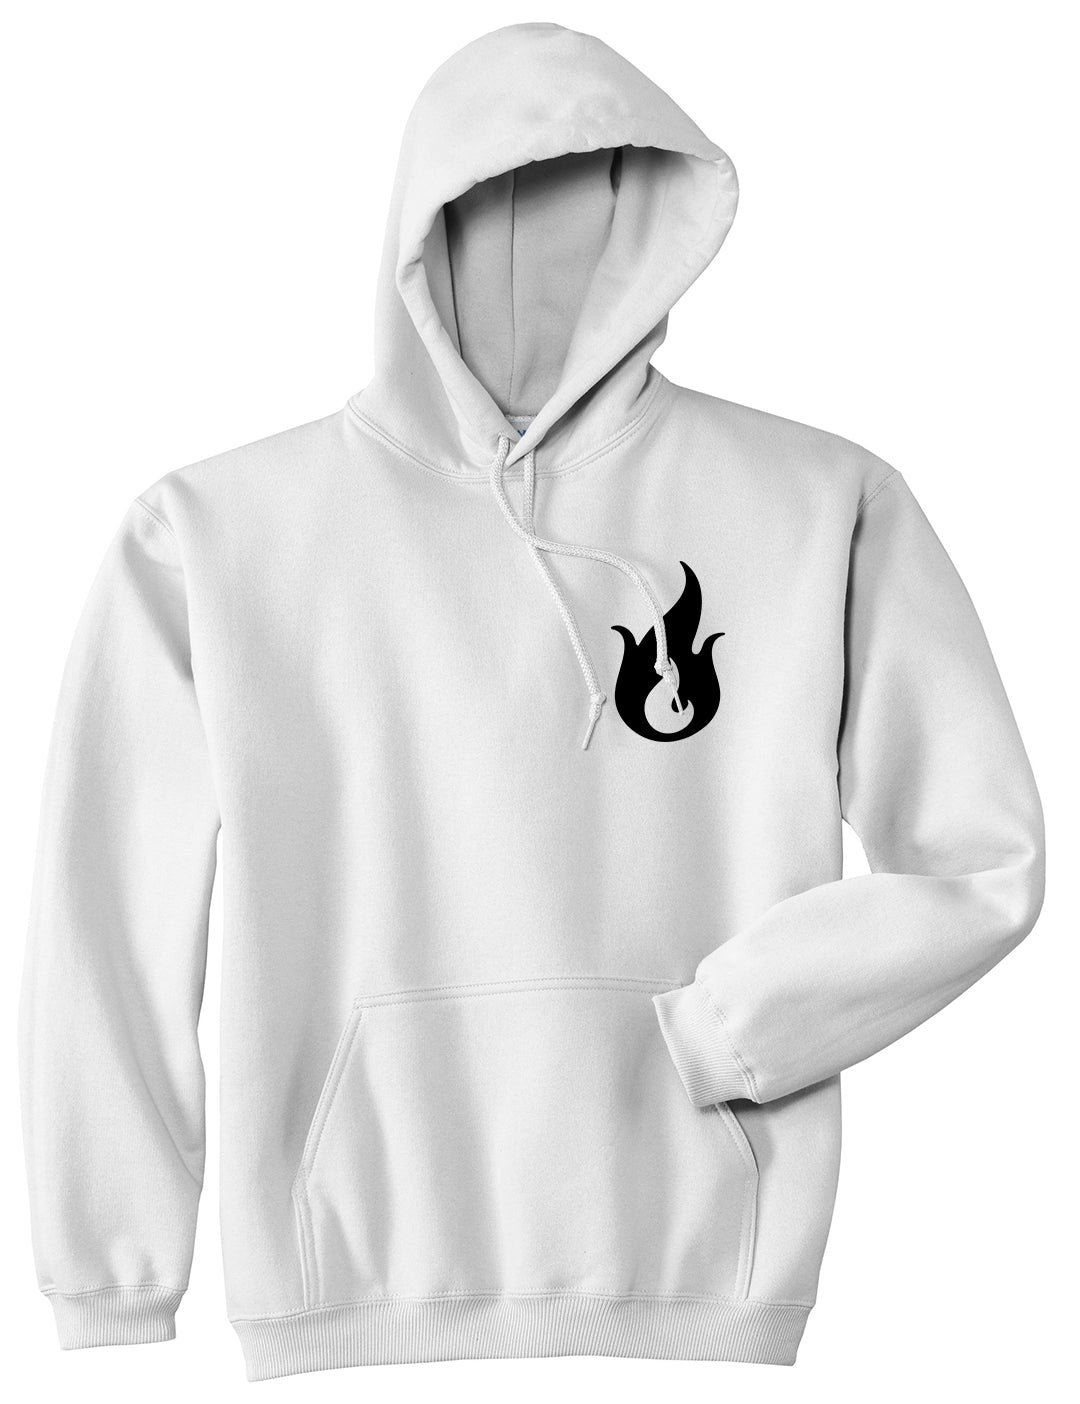 Fire Emoji Chest Mens White Pullover Hoodie by KINGS OF NY